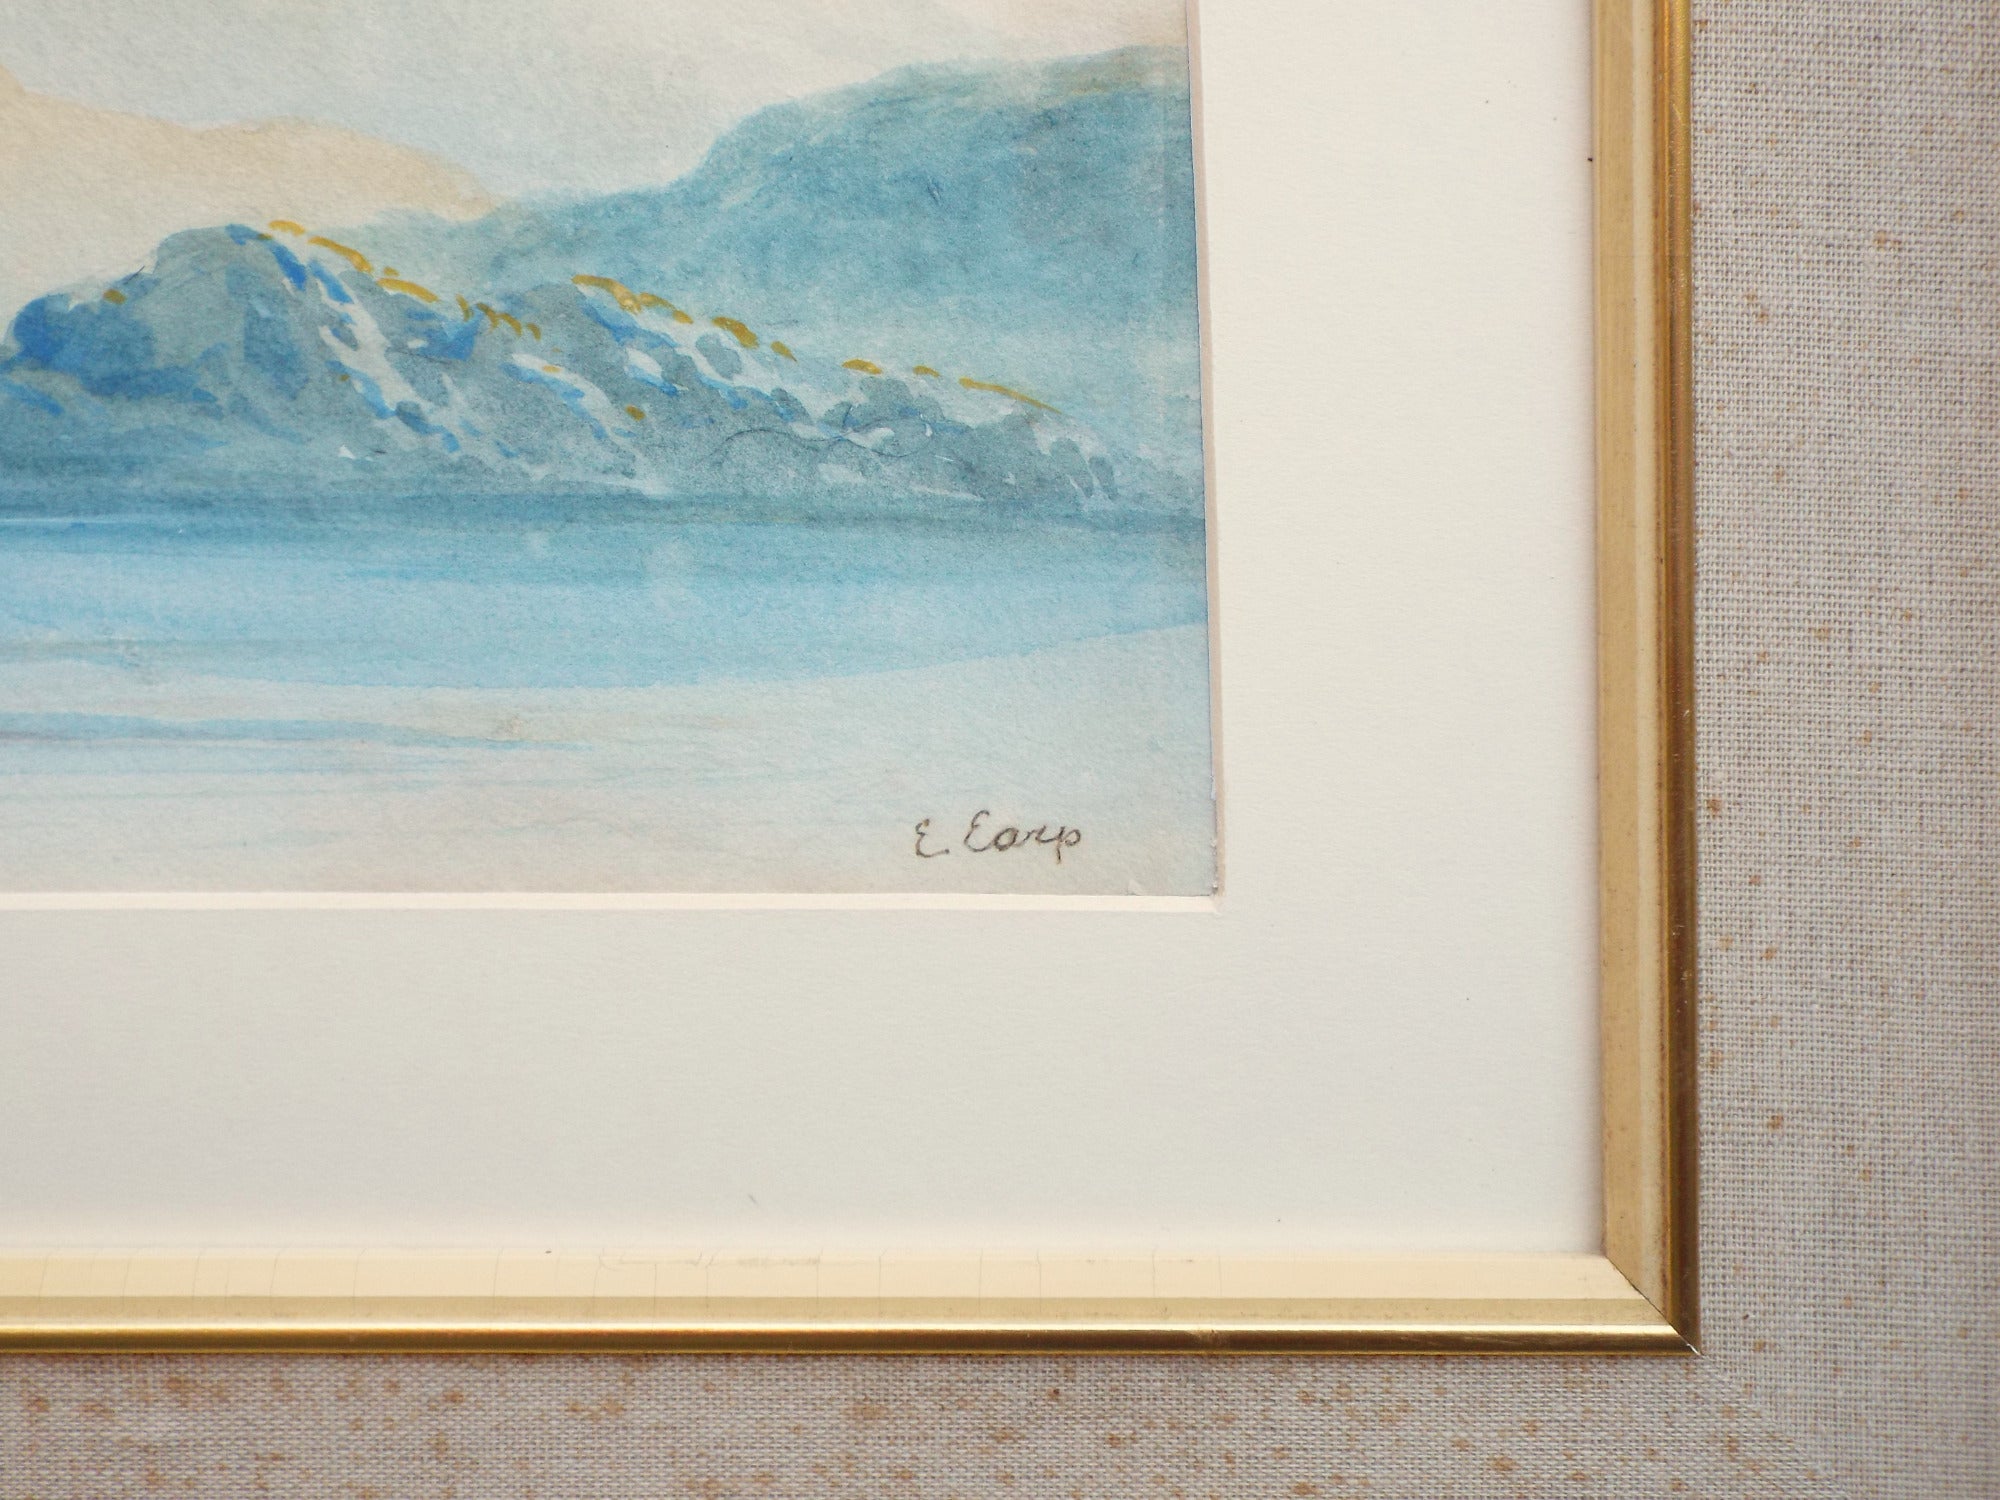 Victorian Watercolour, Framed Original Painting The Lake District by Edwin Earp